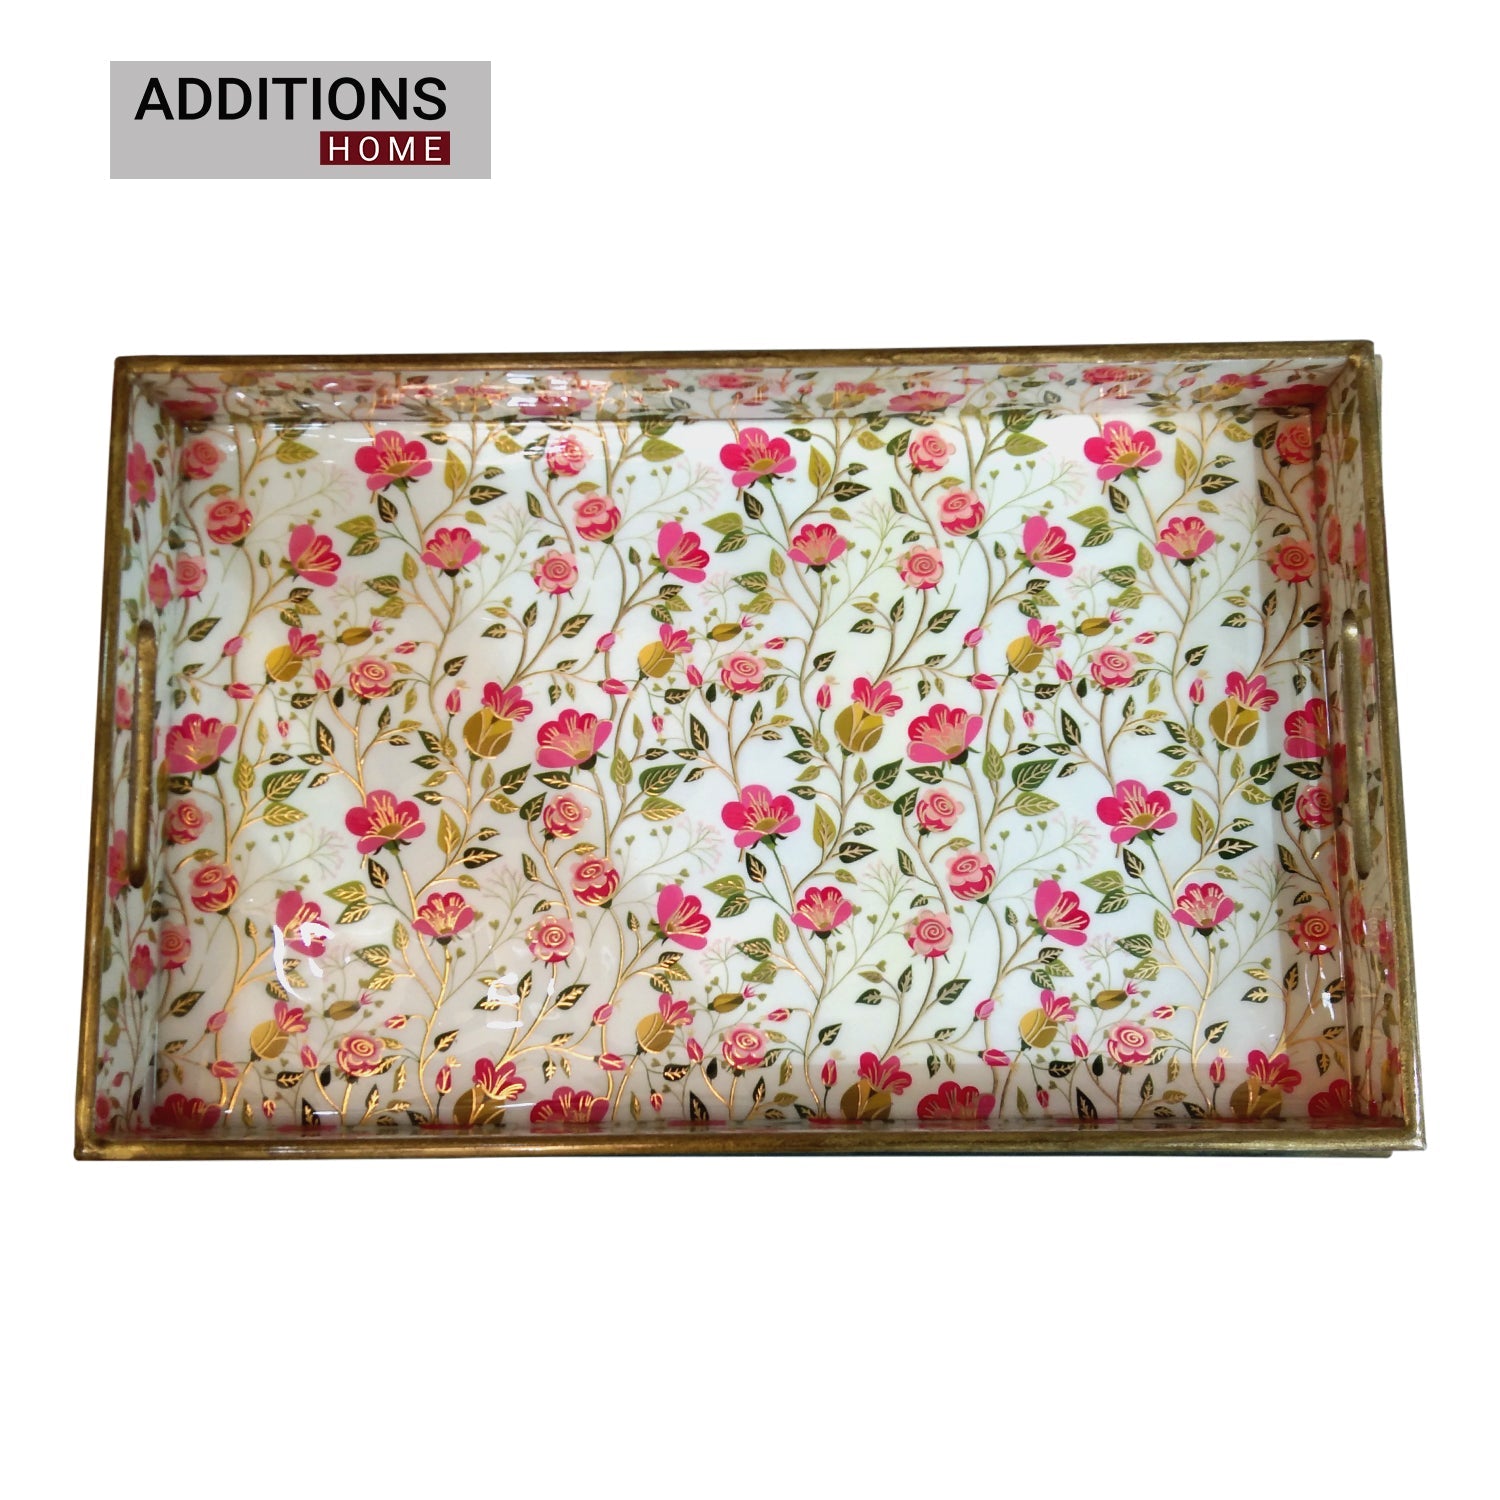 Lacquer Printed Wooden Food and Beverages Serving Tray for Home, Office, Kitchen & Dinning 3 Set